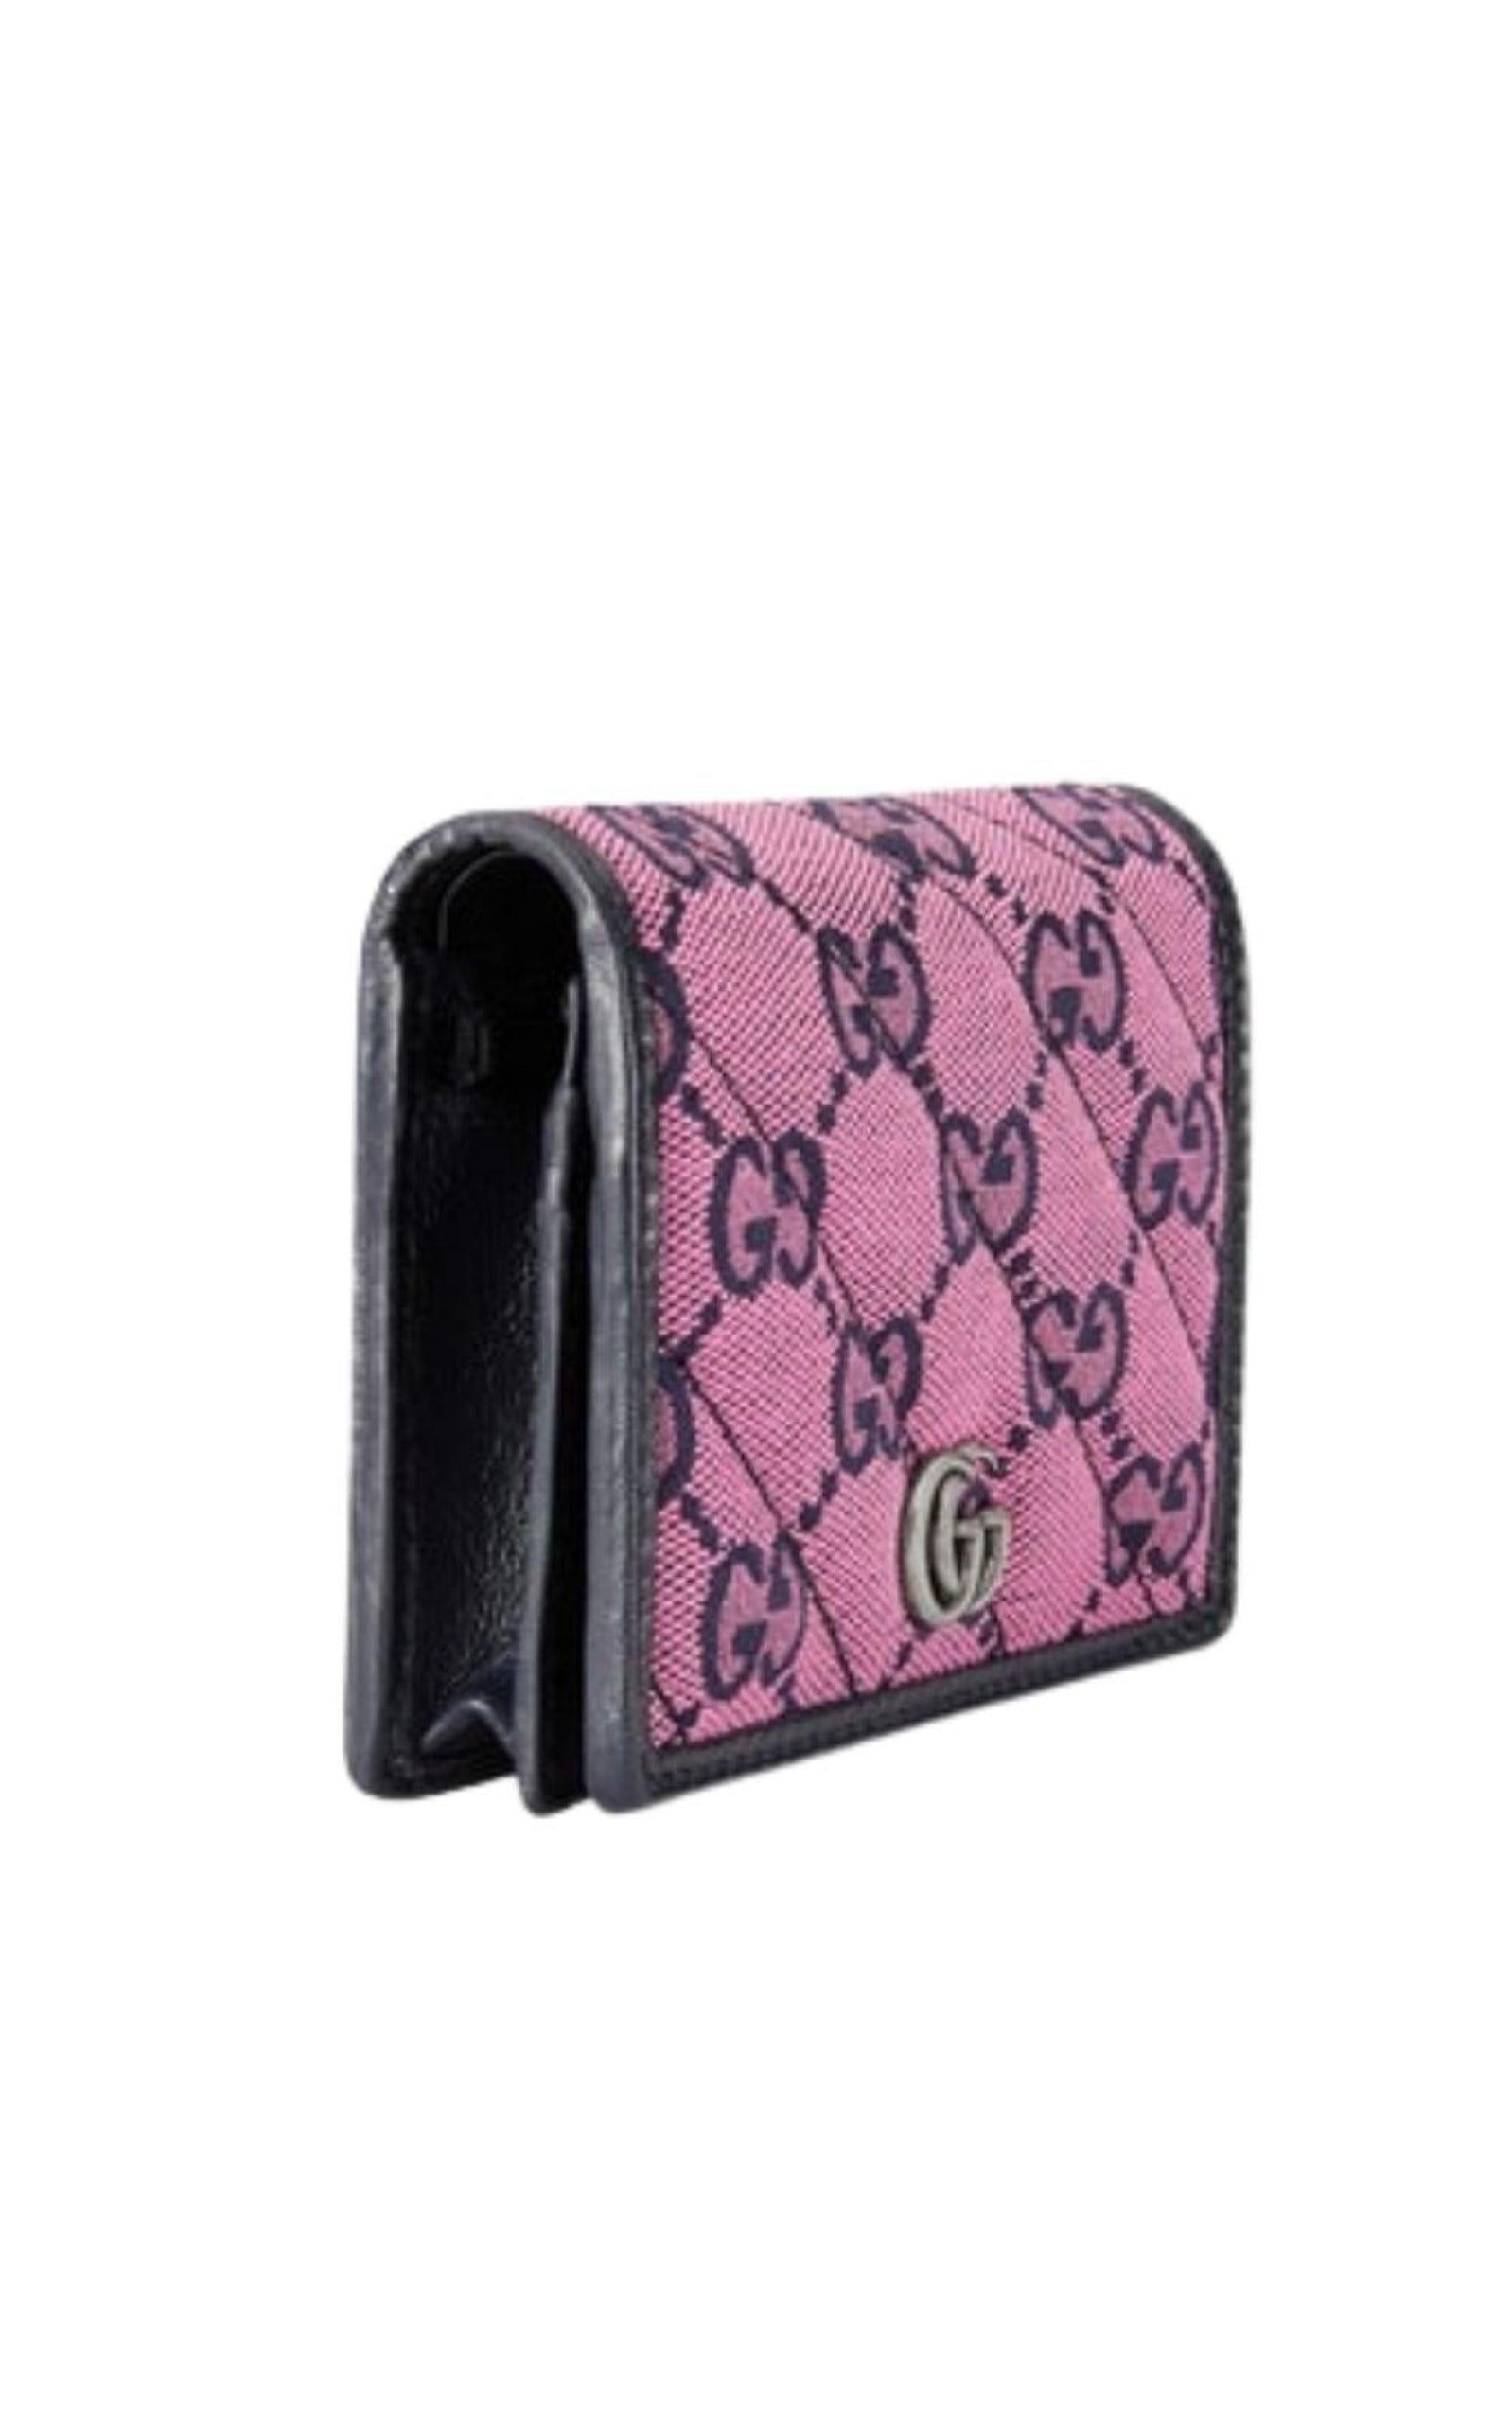 GUCCI Marmont GG Matelasse Leather Zip Around Wallet Pink - 15% OFF